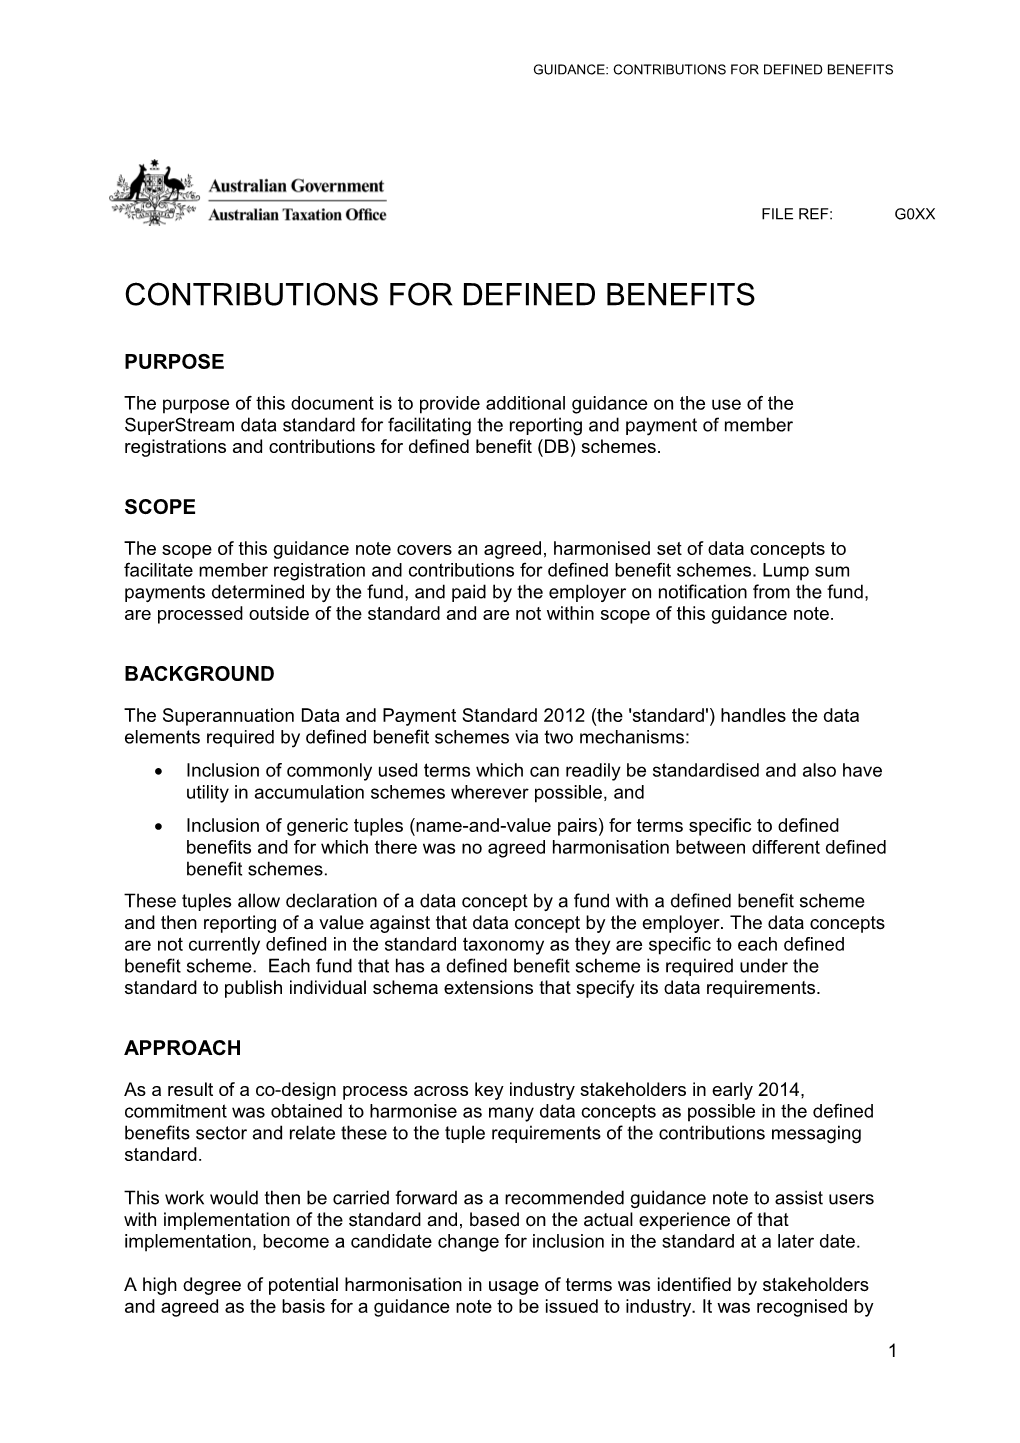 Contributions for Defined Benefits